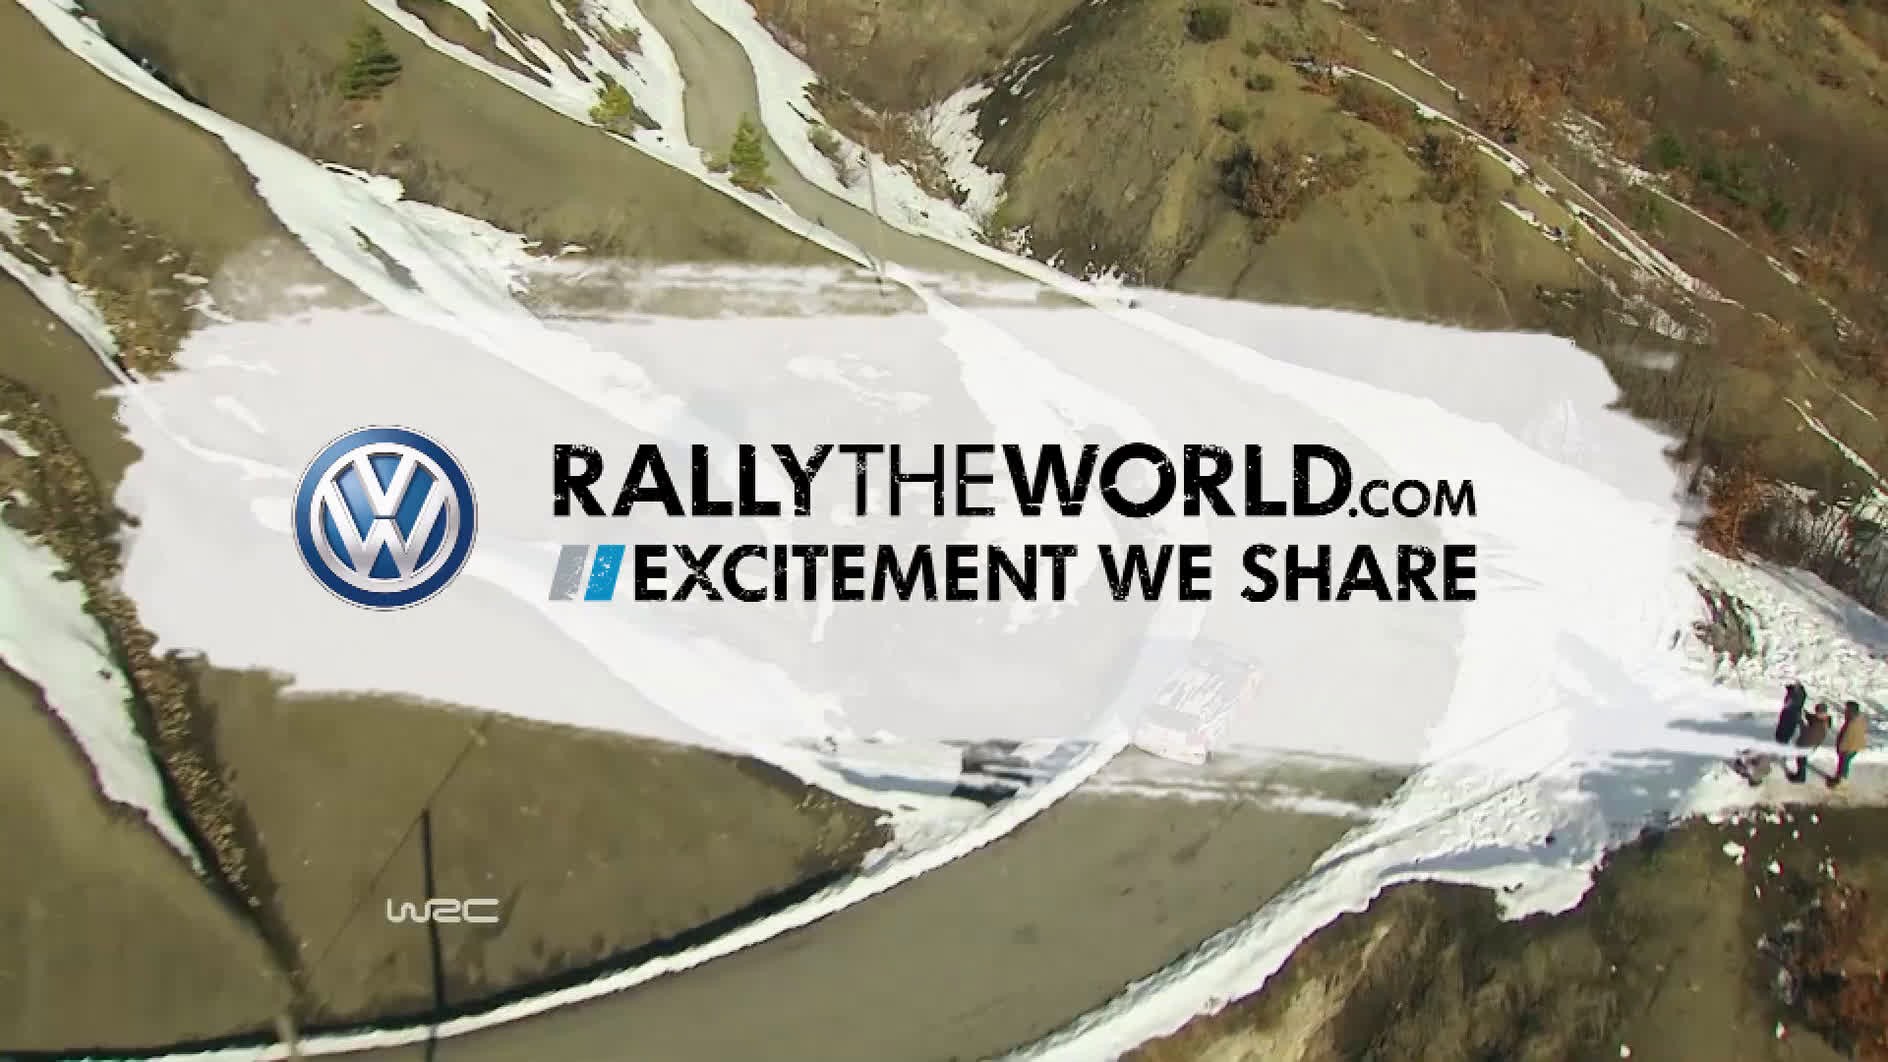 Volkswagen Rally The World - Do it for the drive